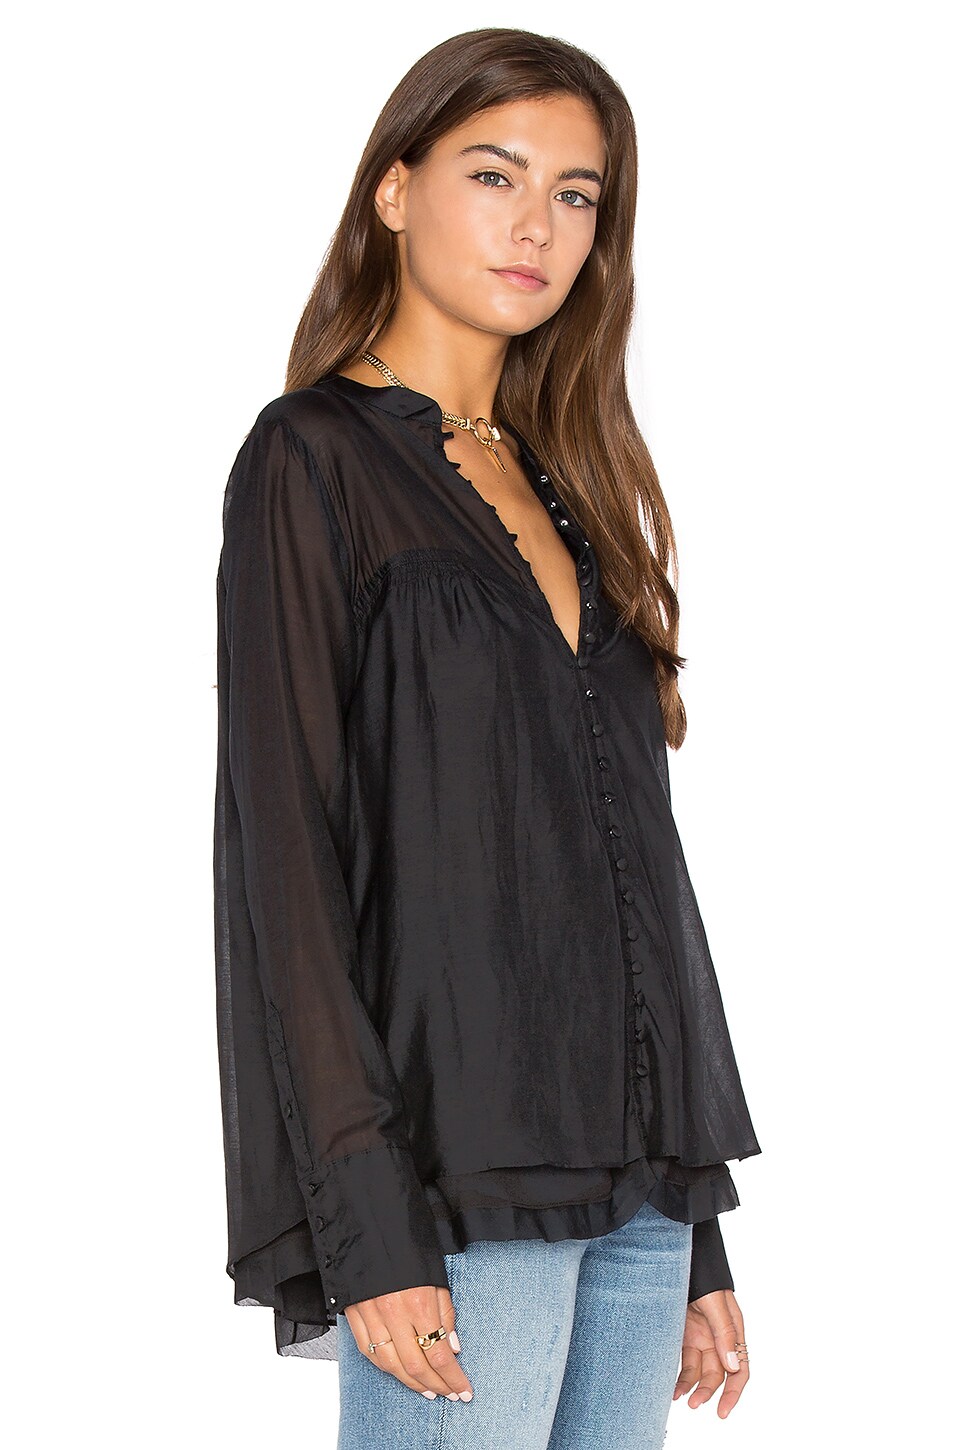 Free People Through and Through Top in Black | REVOLVE